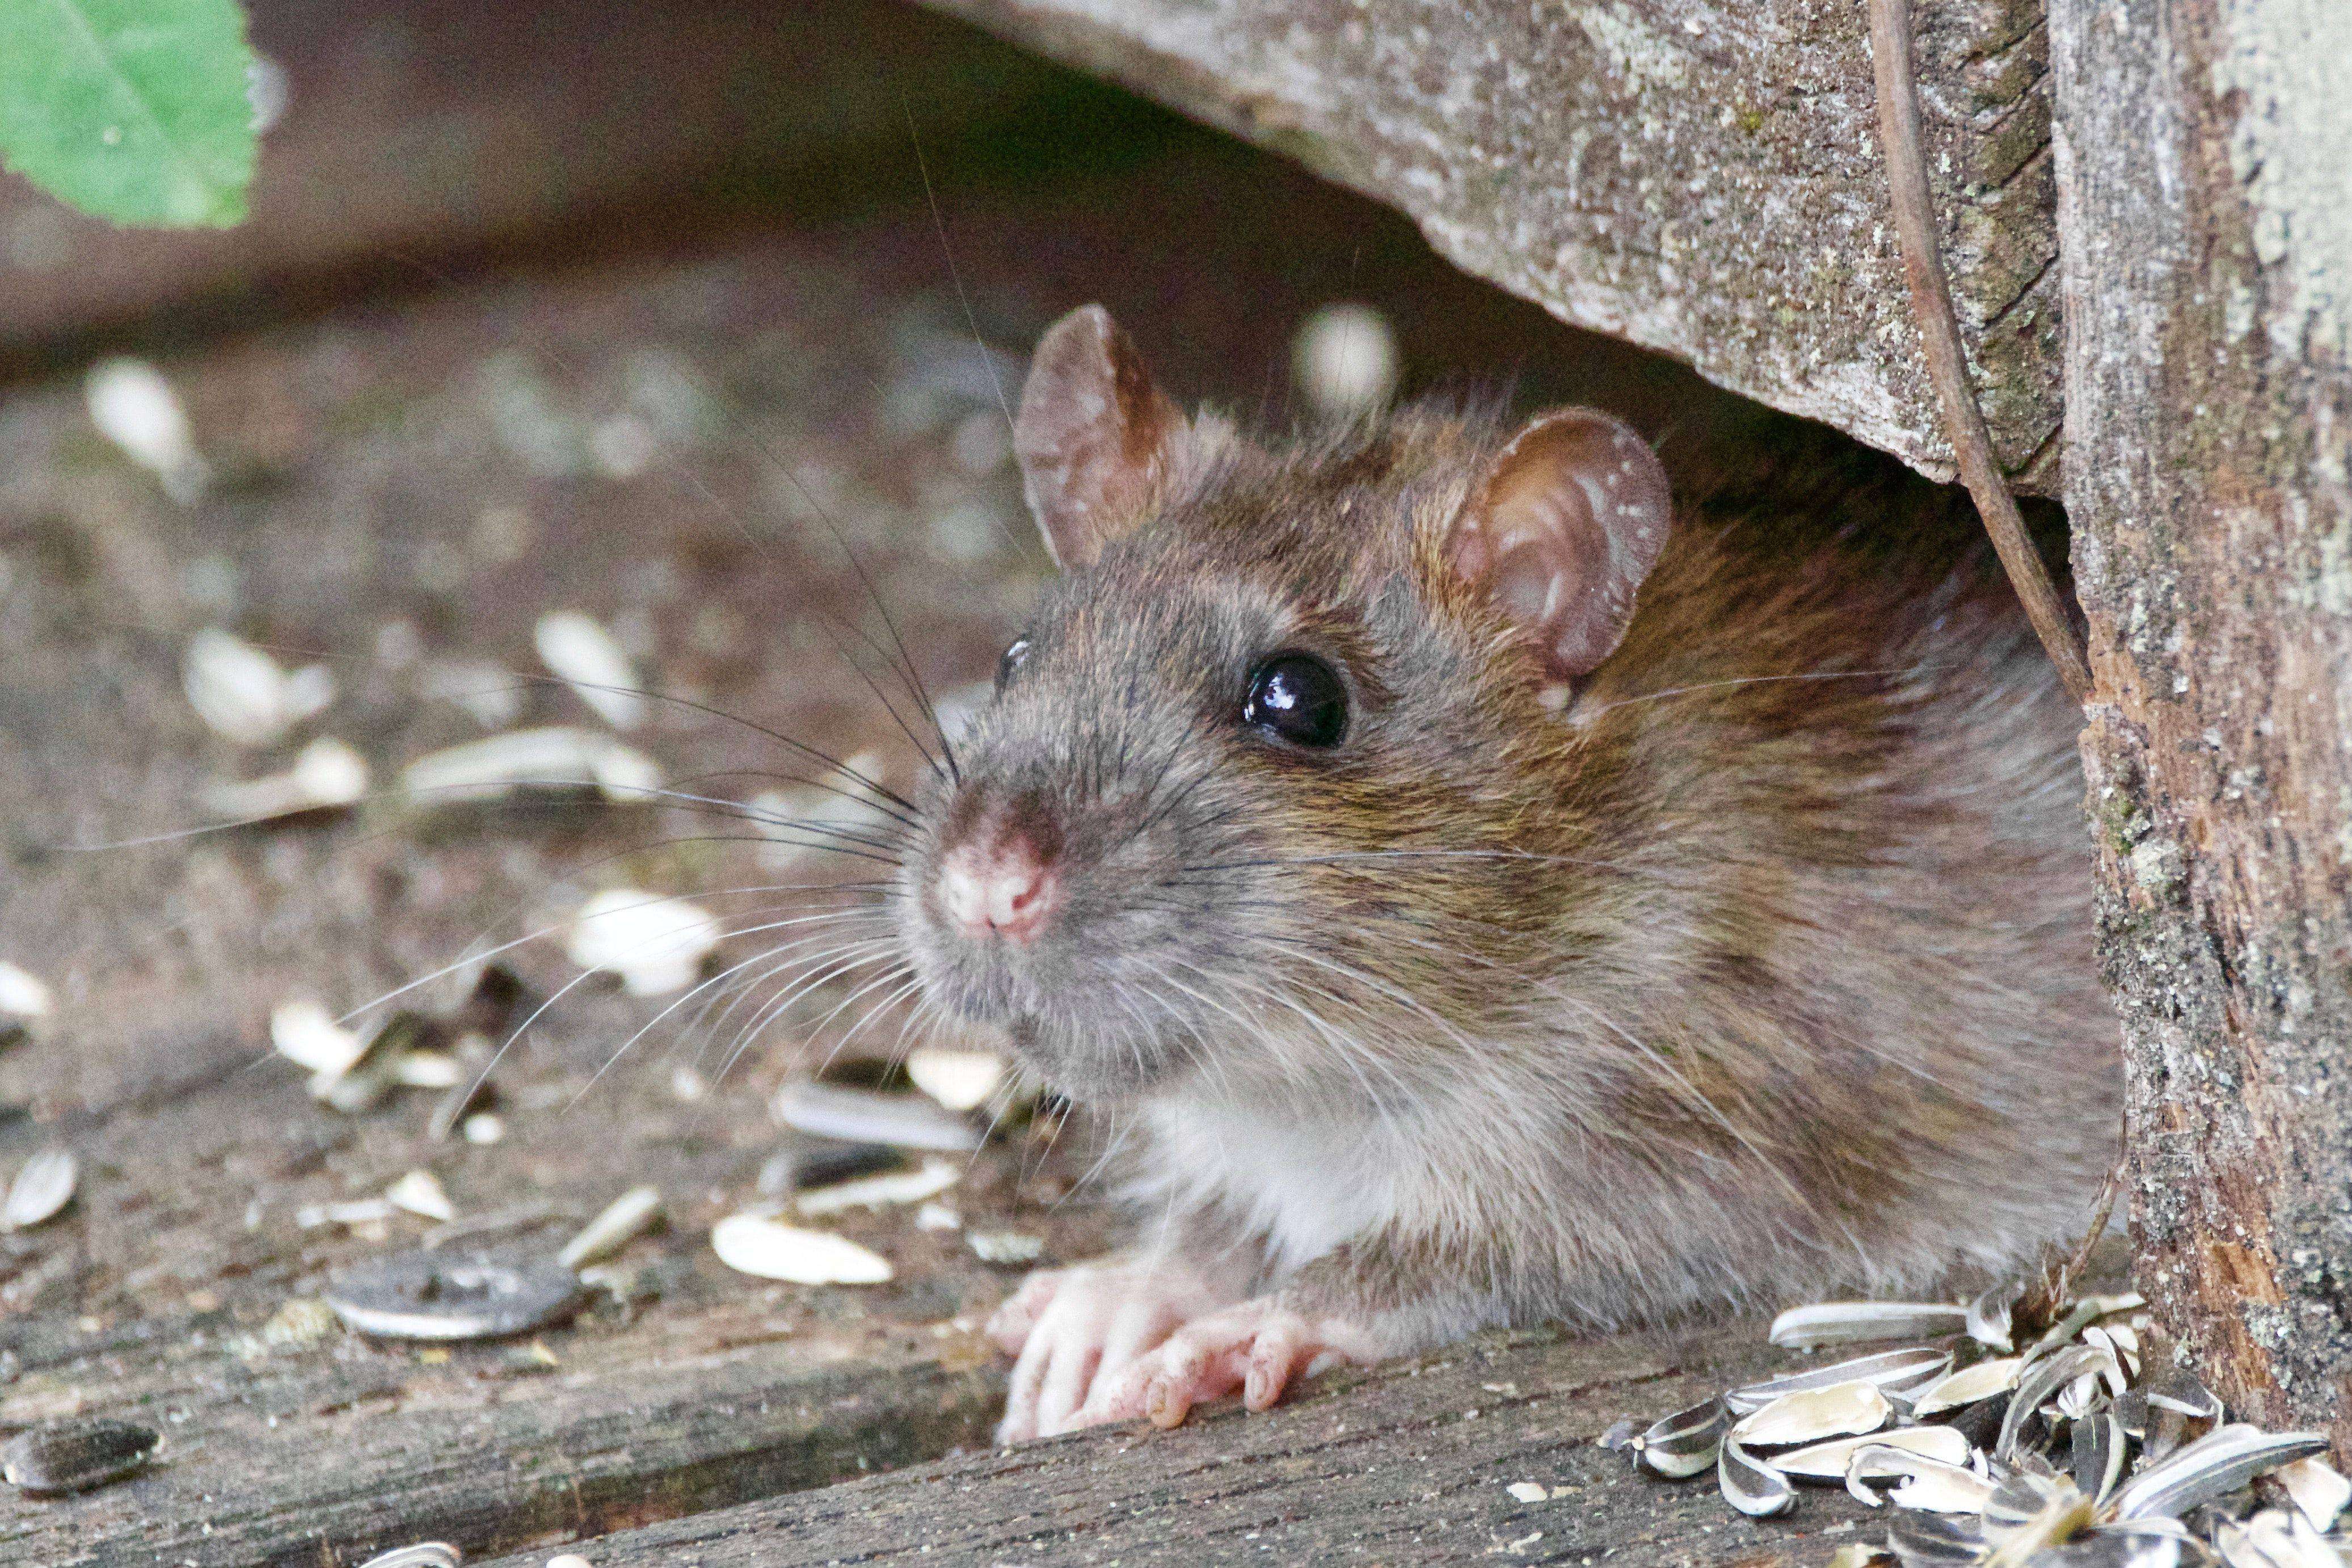 NSW Government's $50 million mouse plague package potentially putting other animals at risk